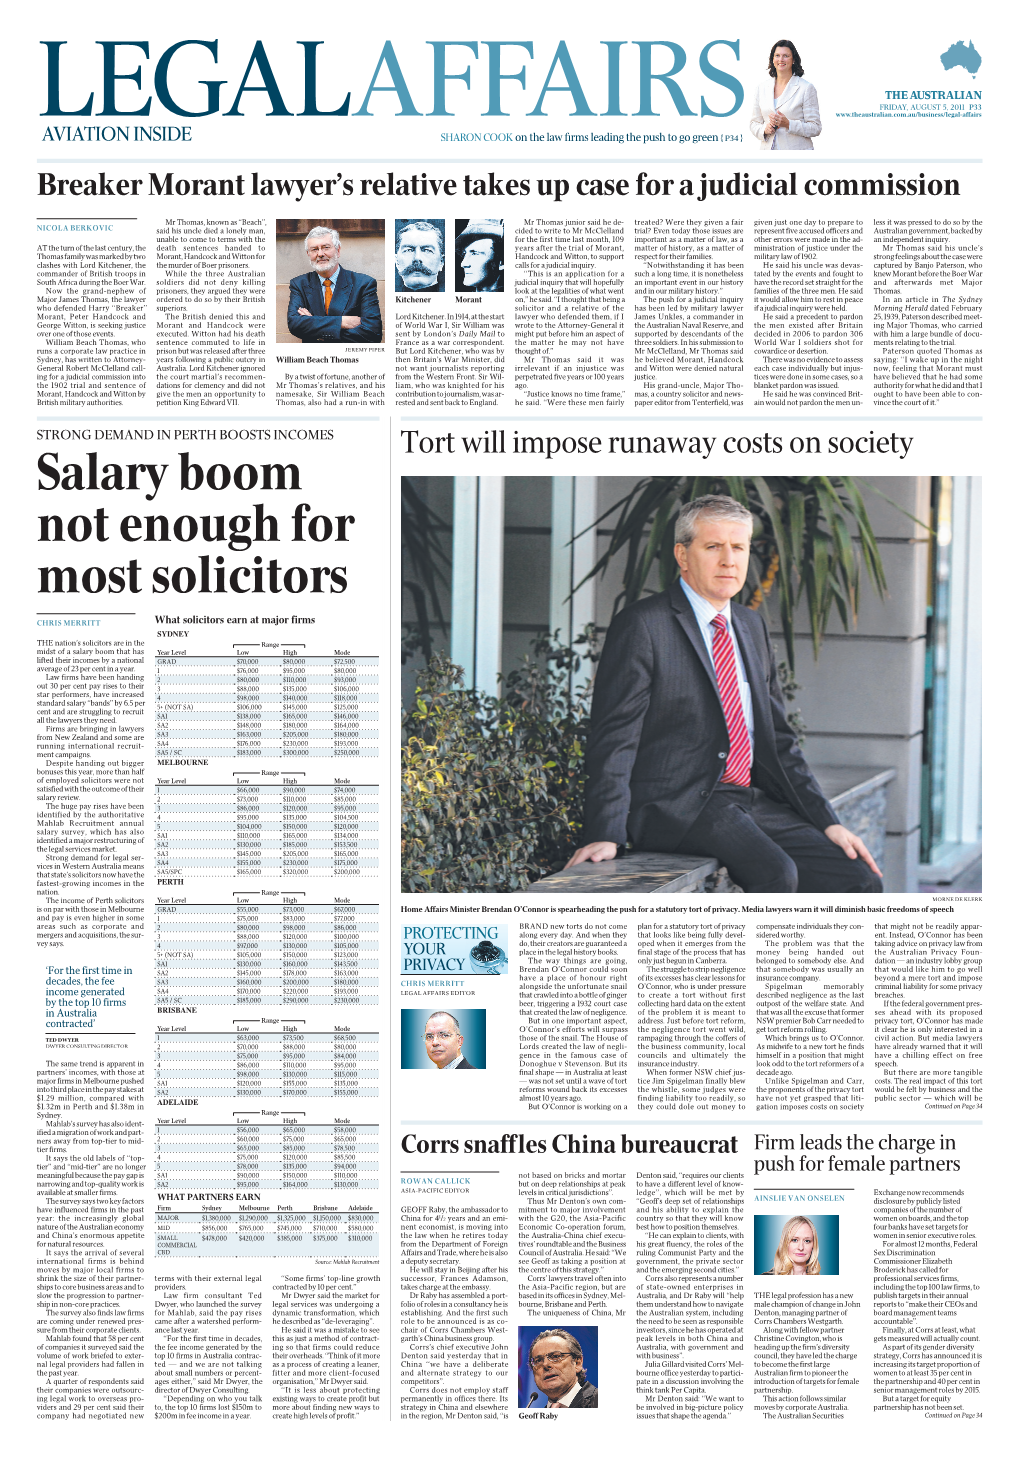 Salary Boom Not Enough for Most Solicitors